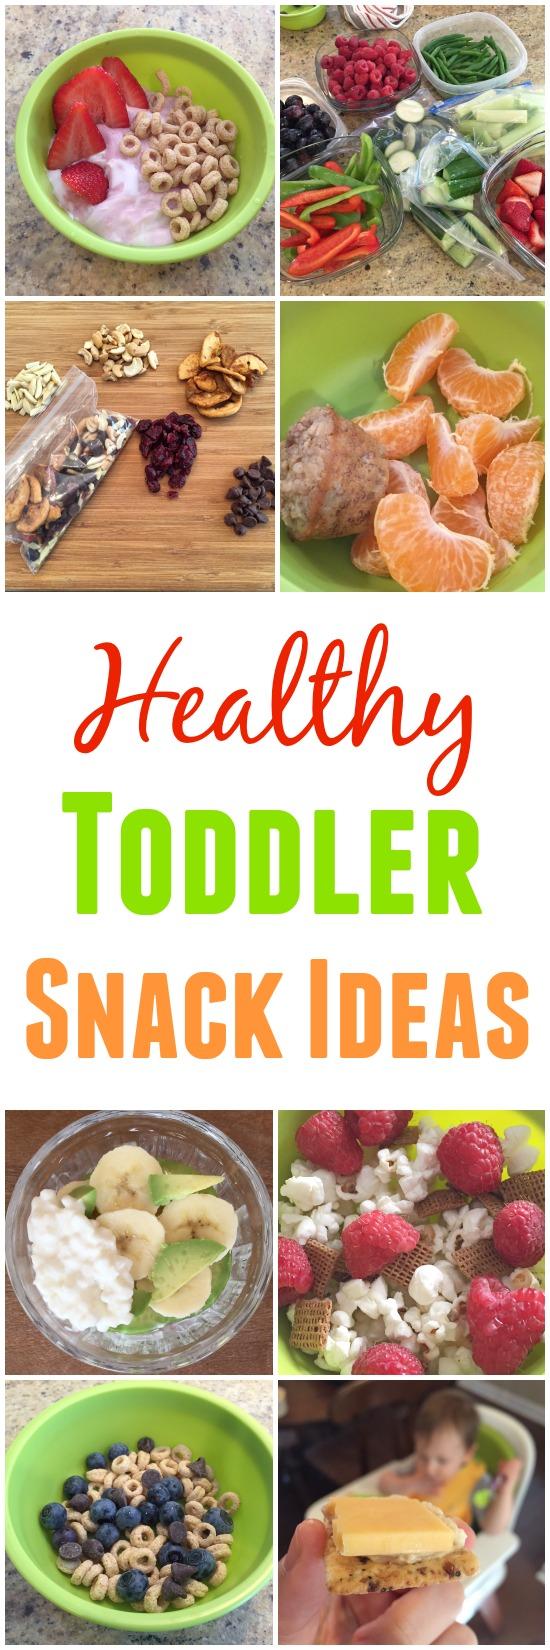 Healthy Toddler Snack Ideas